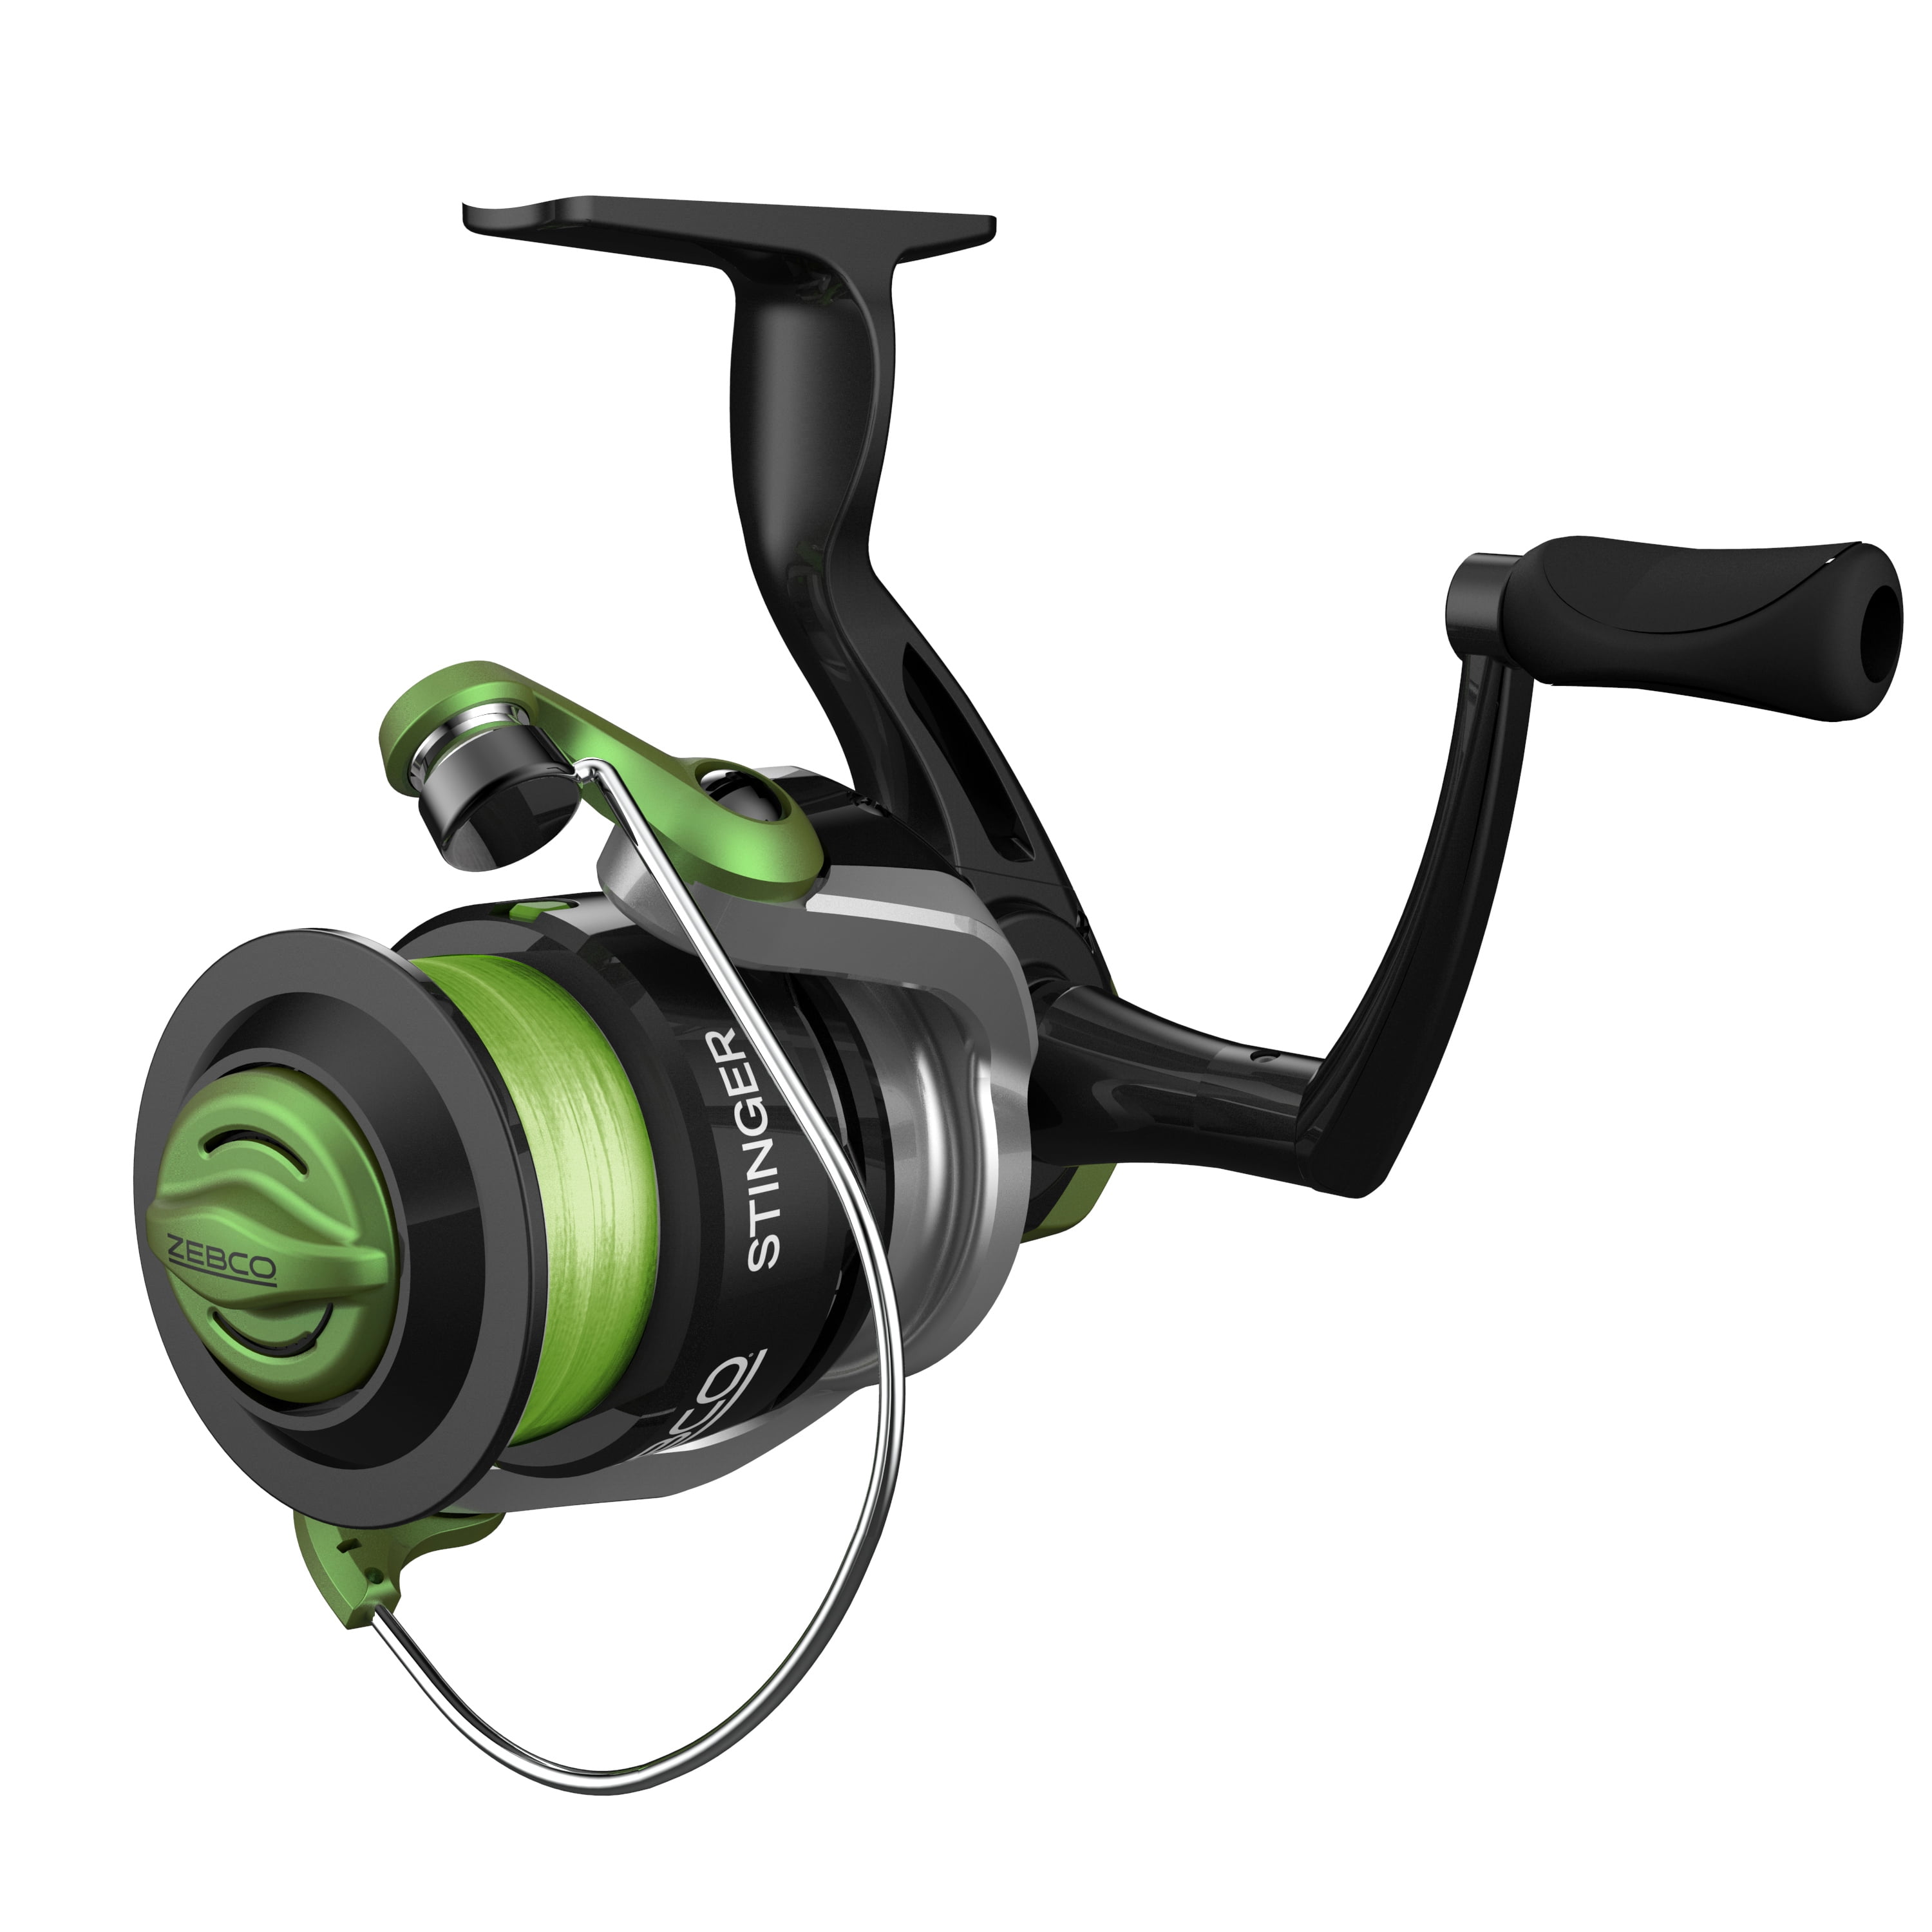 Zebco Stinger Spinning Fishing Reel, Size 20 Changeable Right- or Left-Hand  Retrieve, All-Metal Gears, Ball Bearing System, Pre-Spooled with 8-Pound